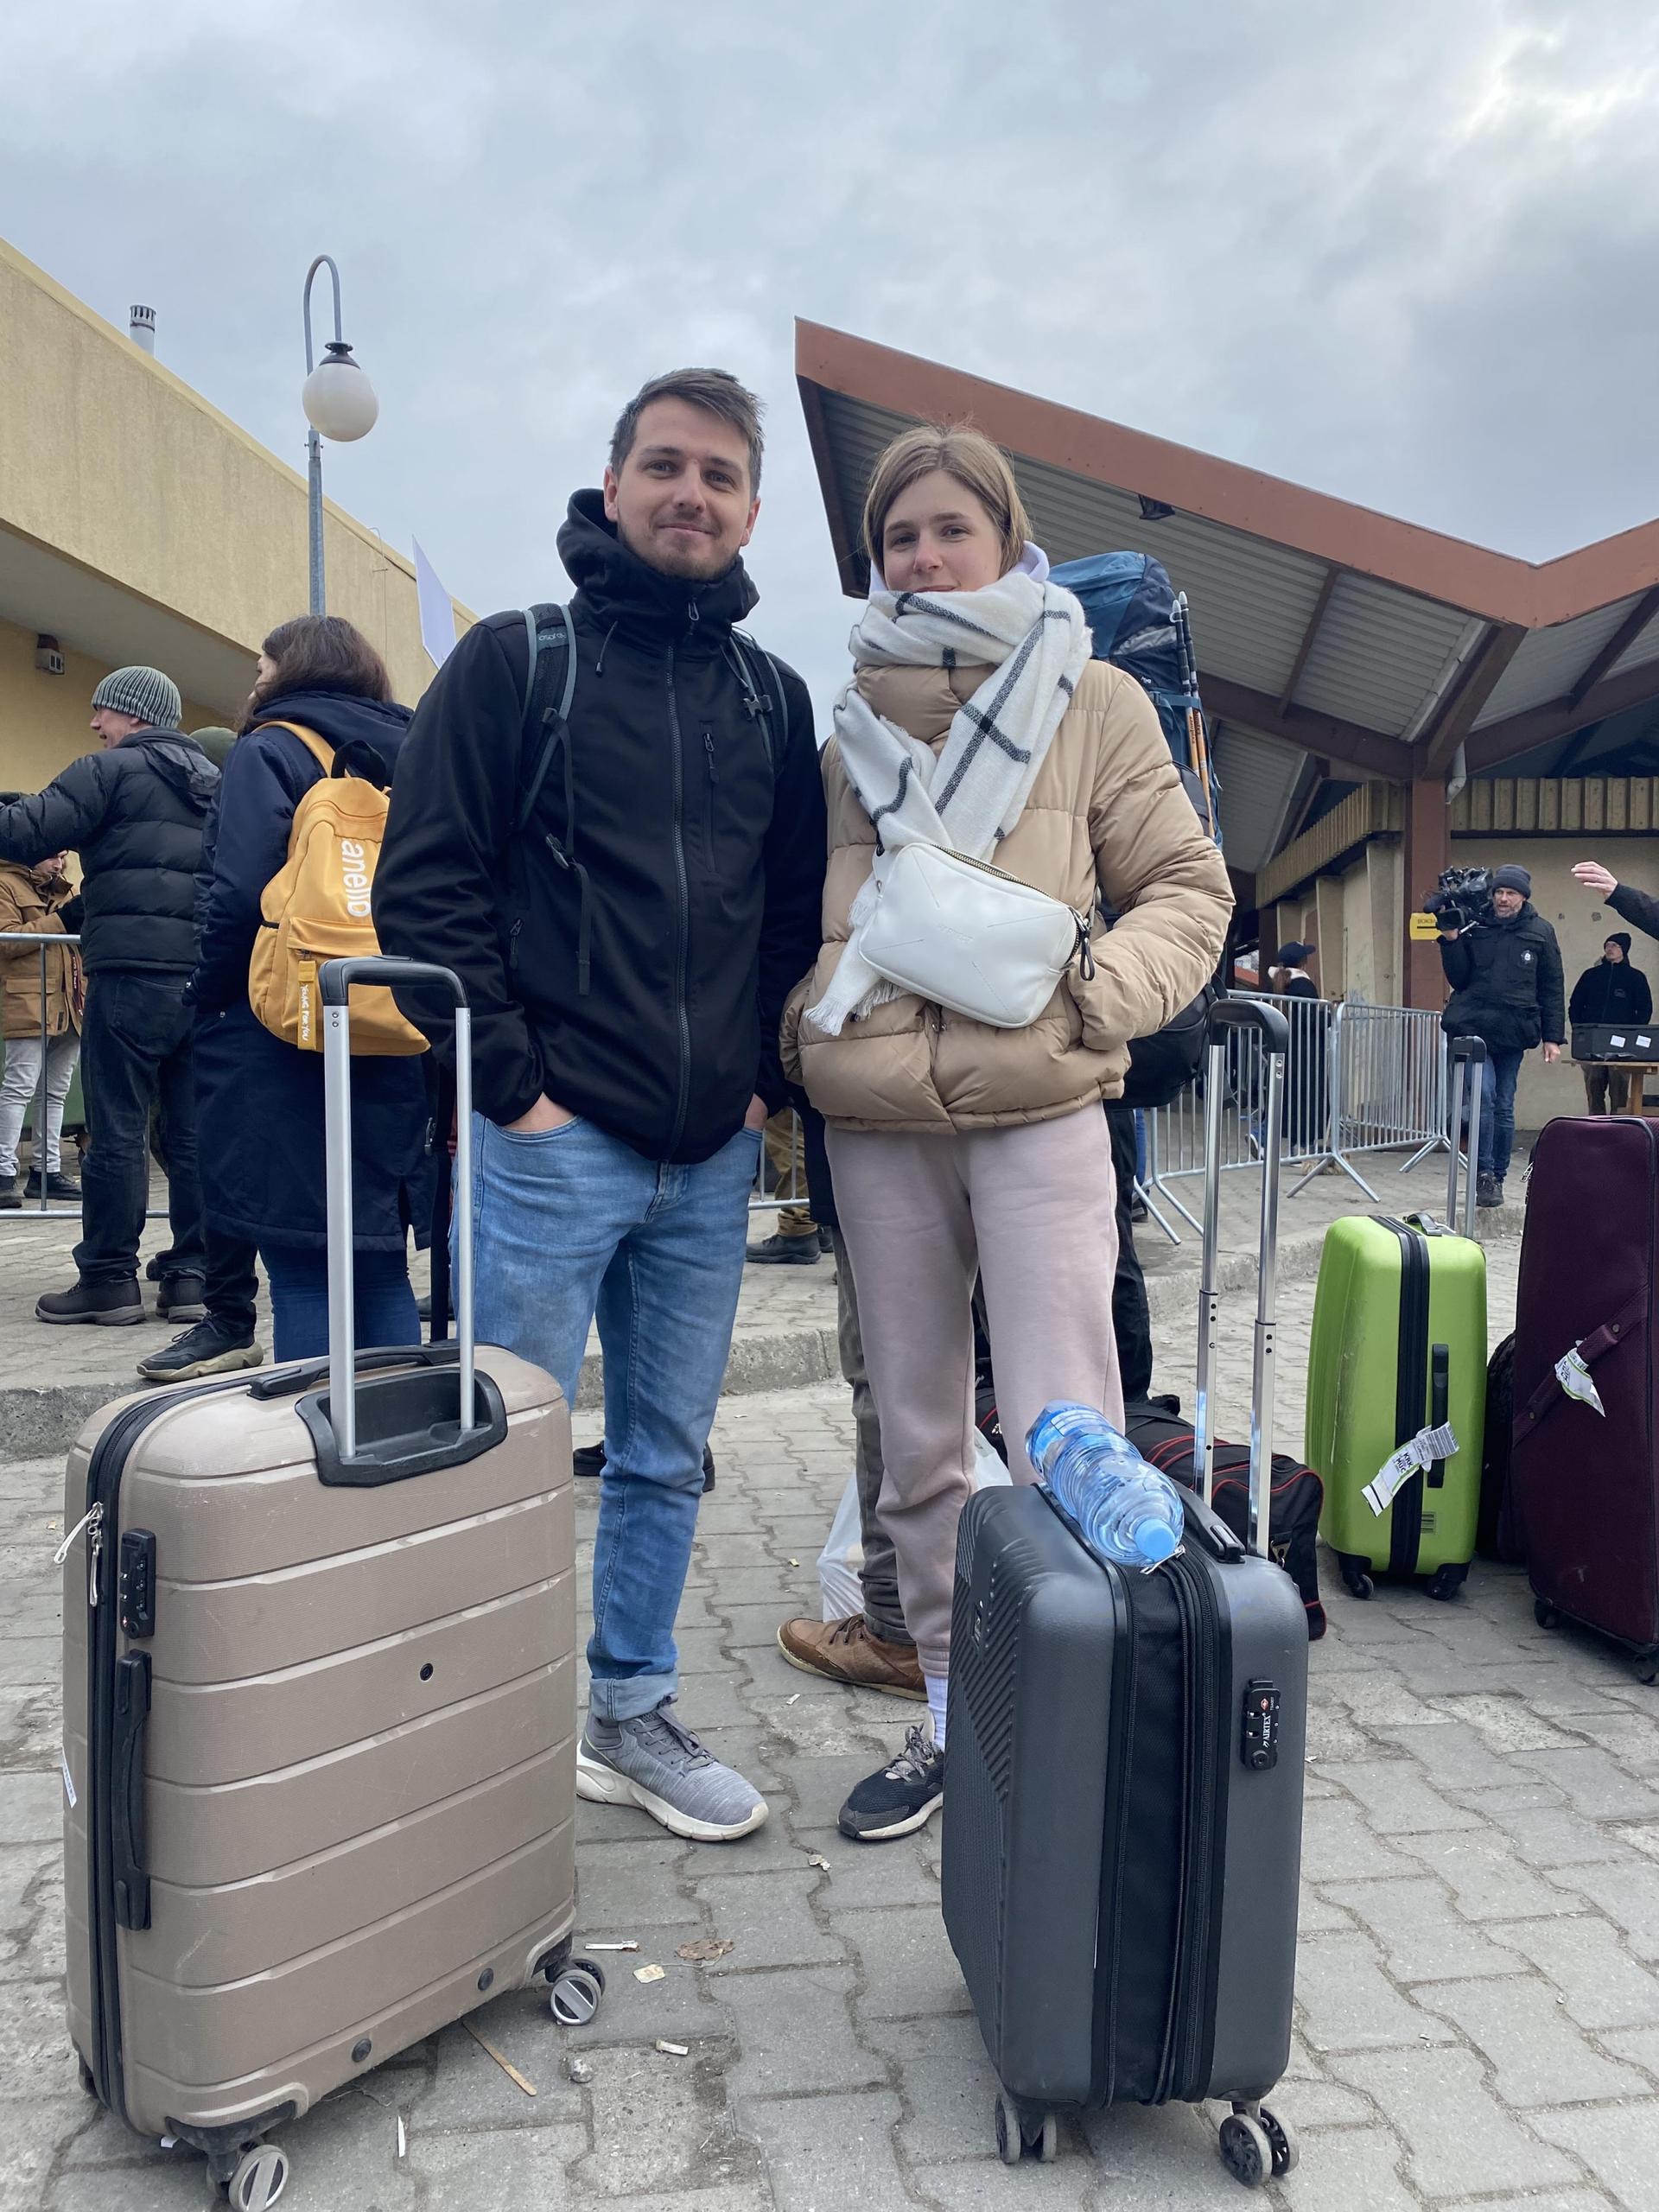 Yevhenii Vladimirtsev and Natalia Osinchuk were on vacation in Sri Lanka when war broke out. They now intend to volunteer for the army and refugee organisations in their hometown Lviv. 